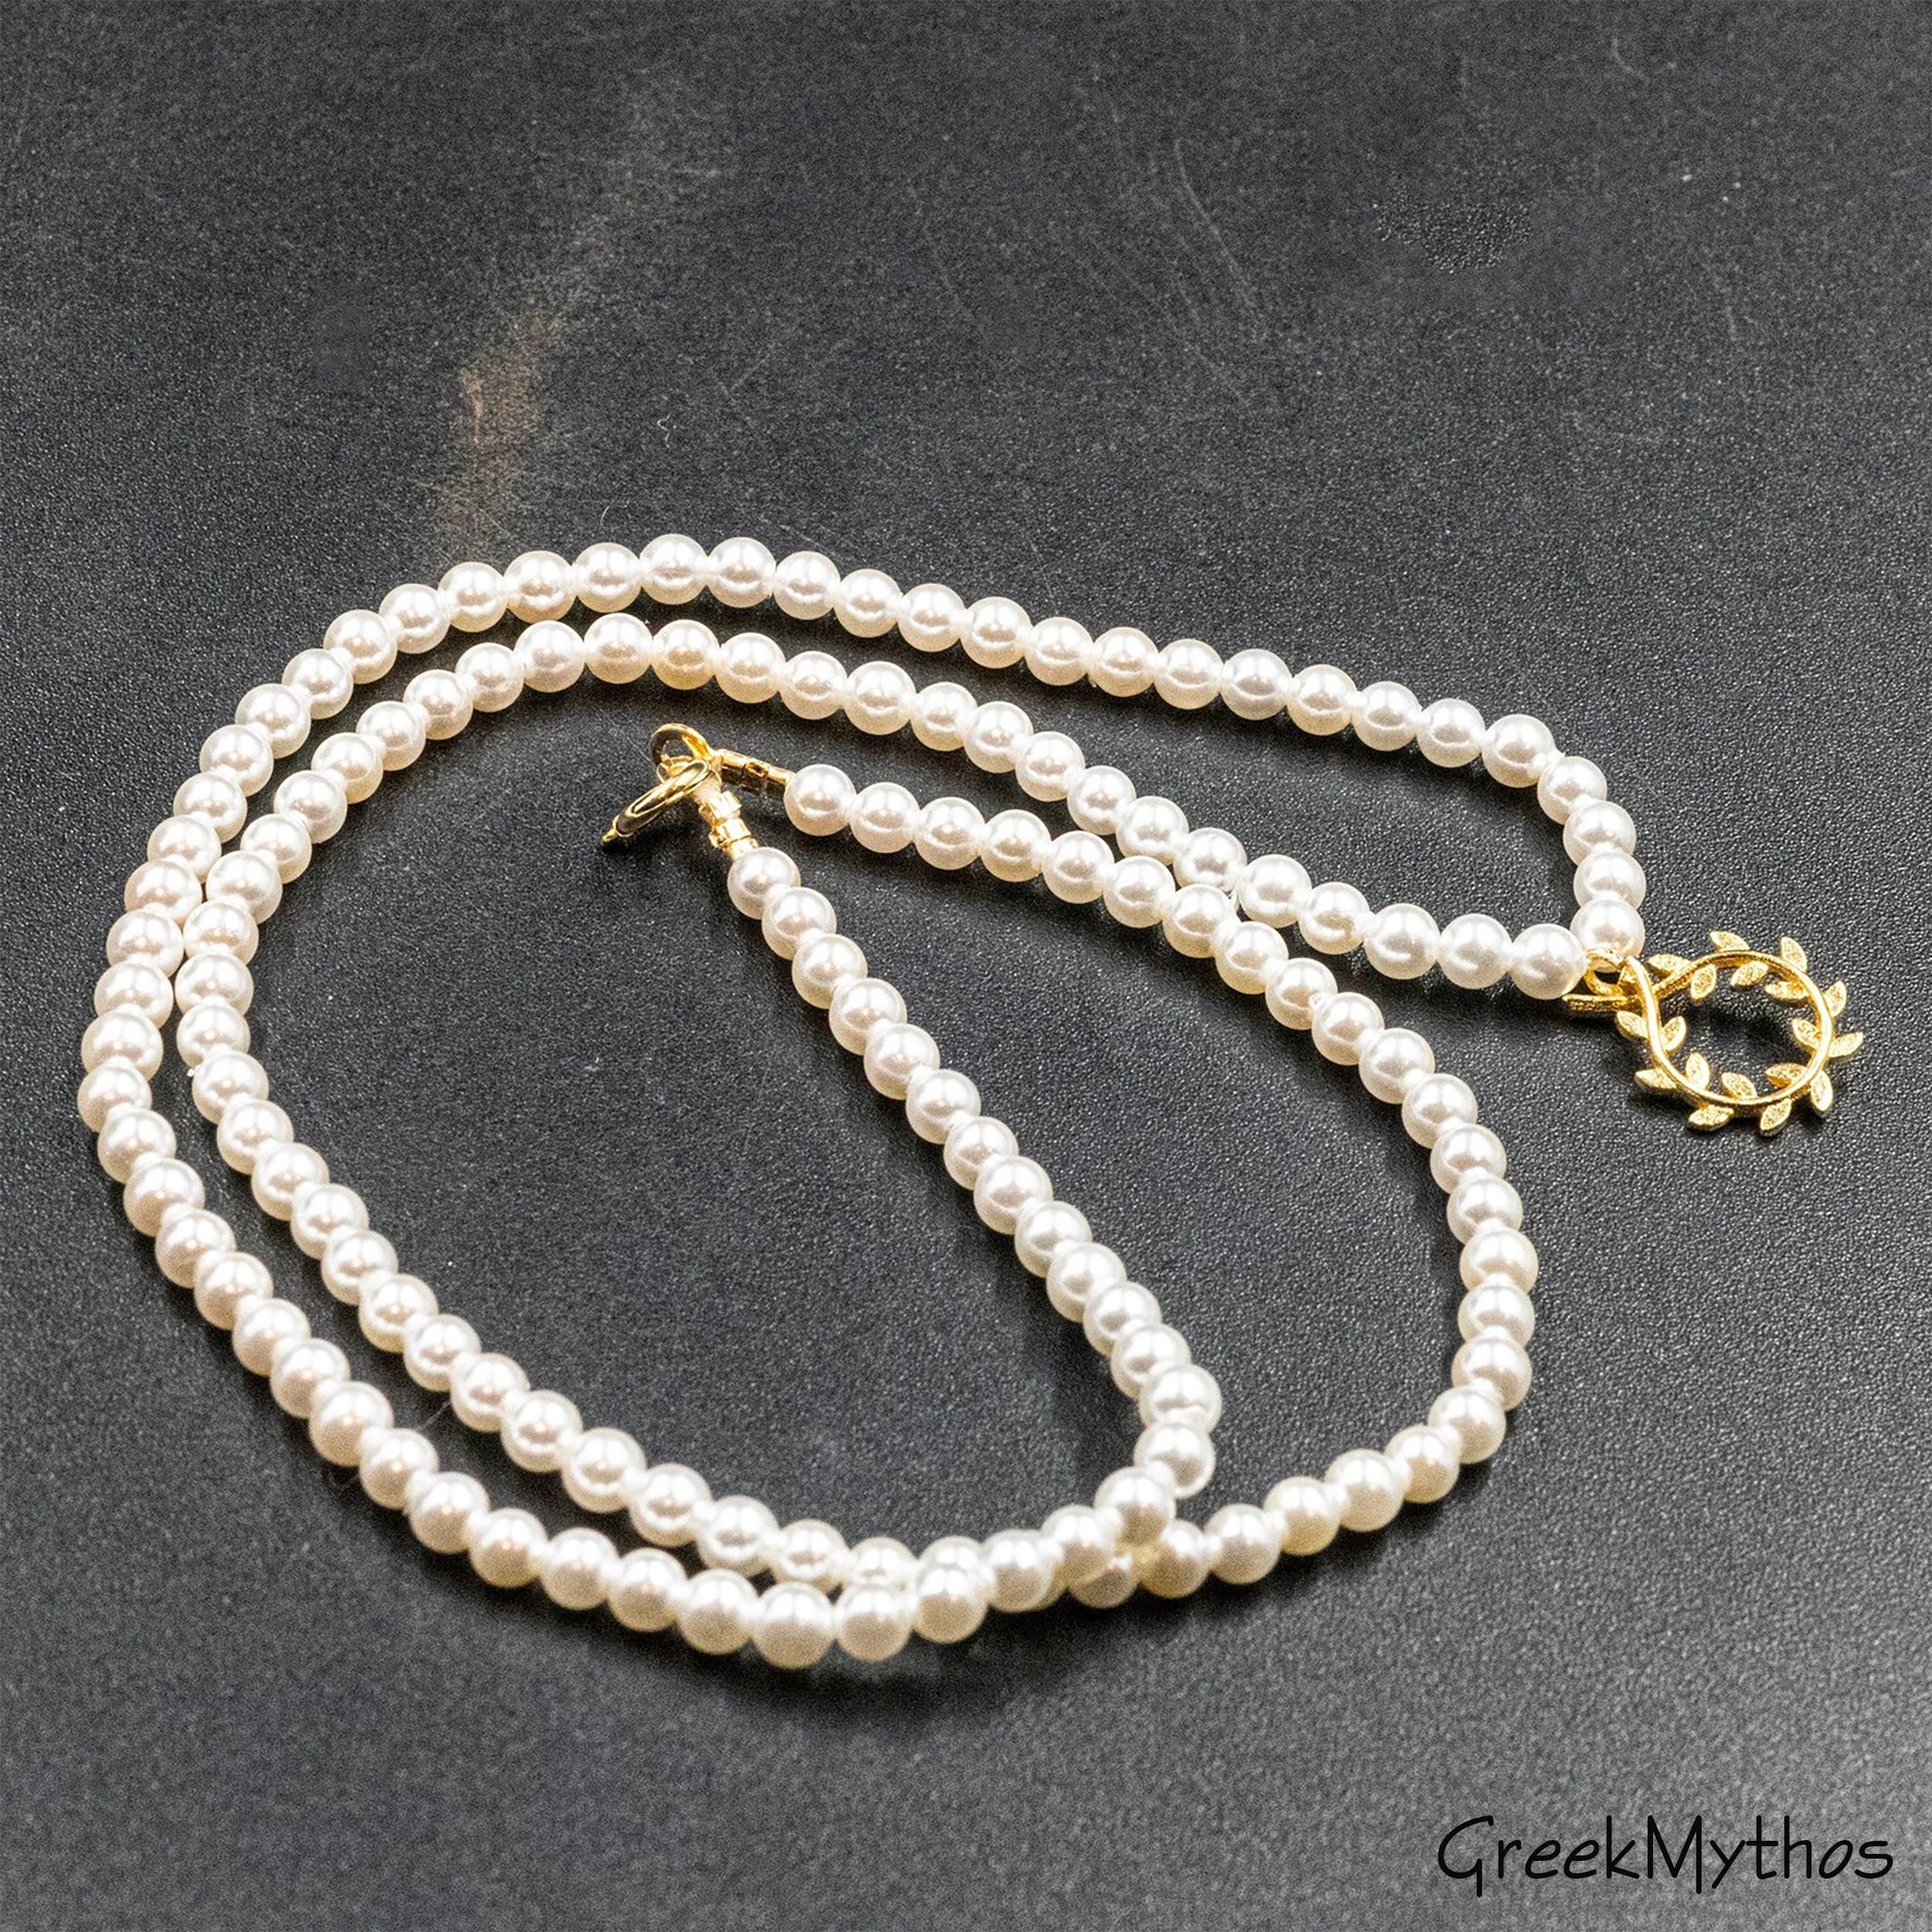 Gold Olive Wreath Delicate White Pearls Necklace, Ancient Greece ...